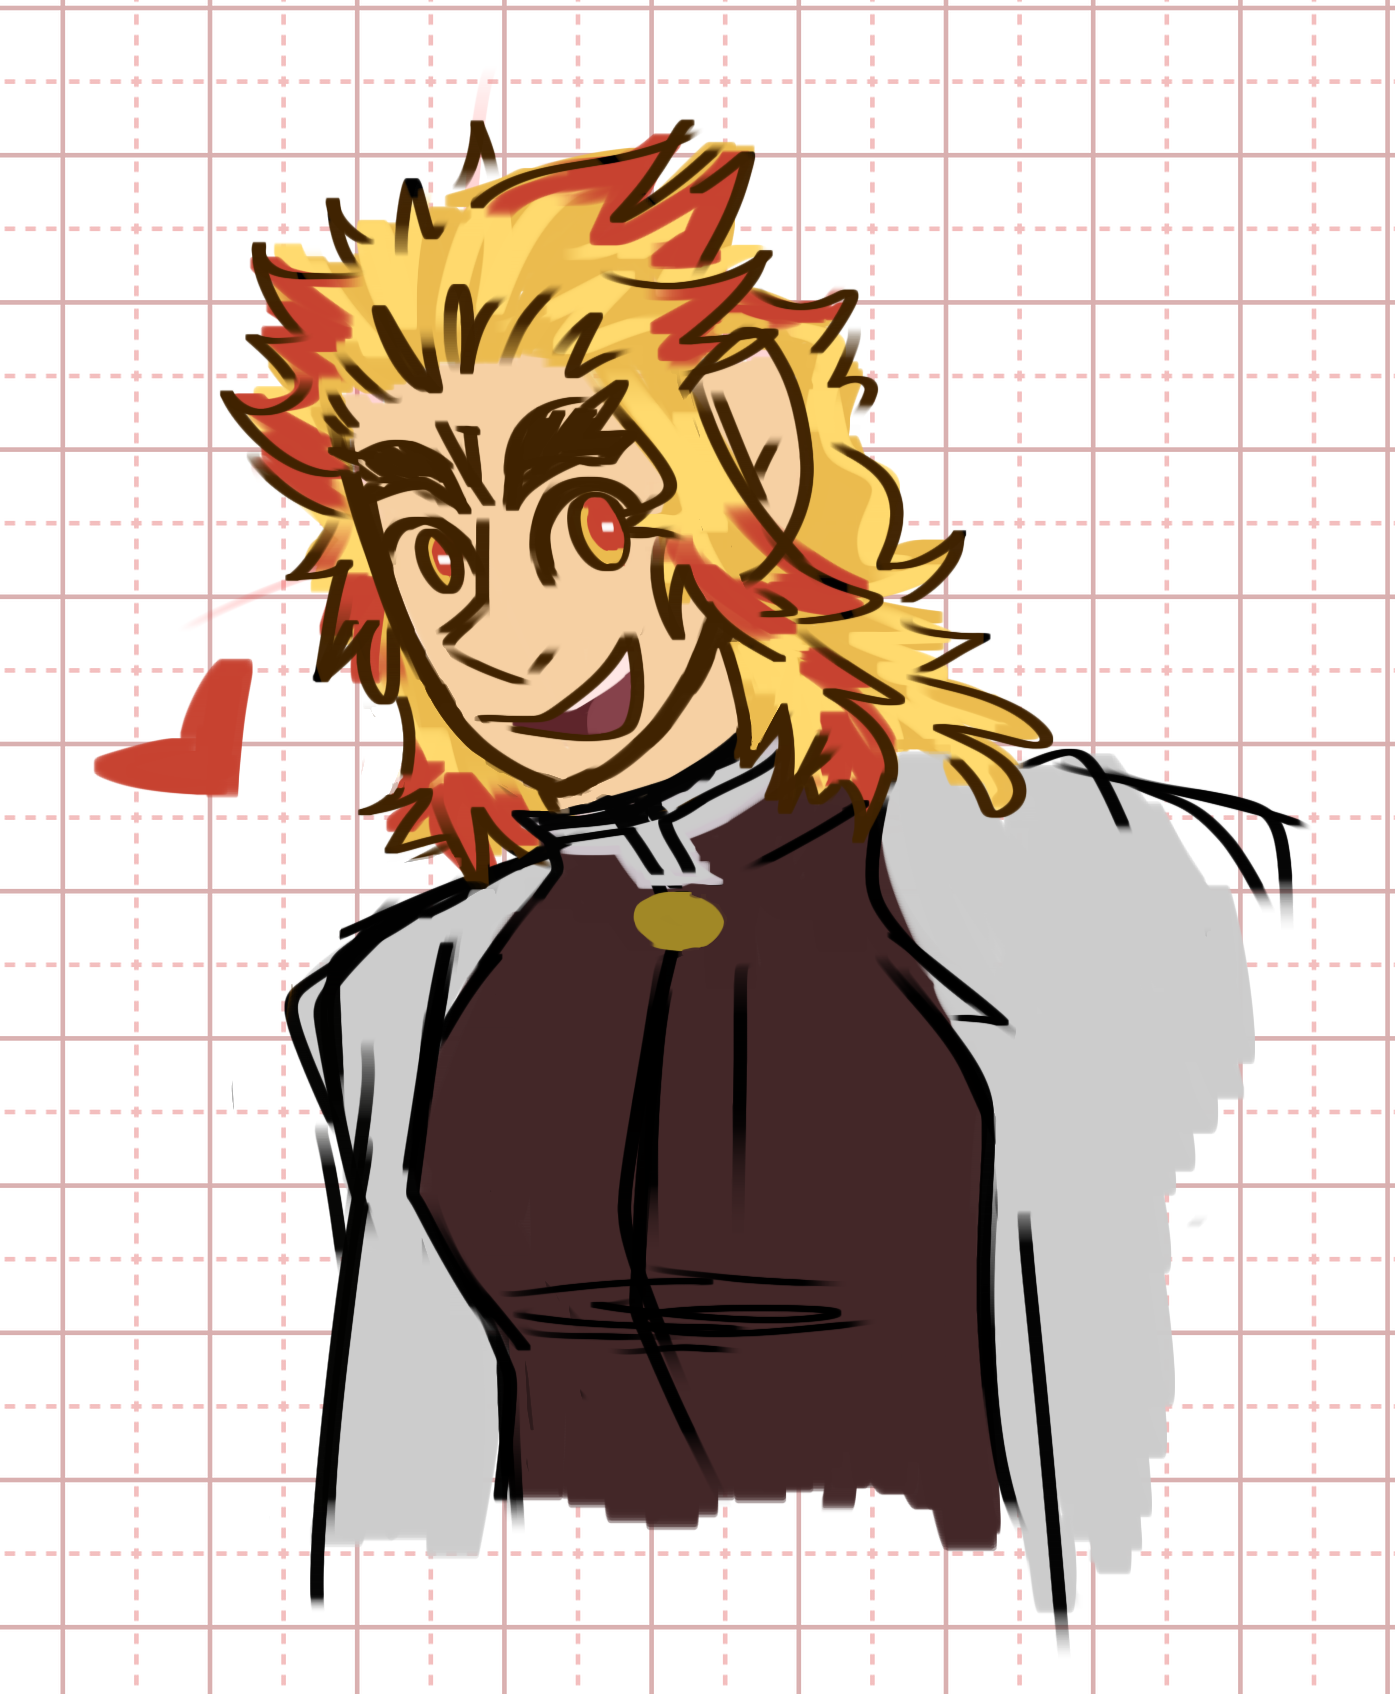 A messy, colored drawing of Kyojuro Rengoku from Demon Slayer. His body facing the left, but he is looking to his back and smiling